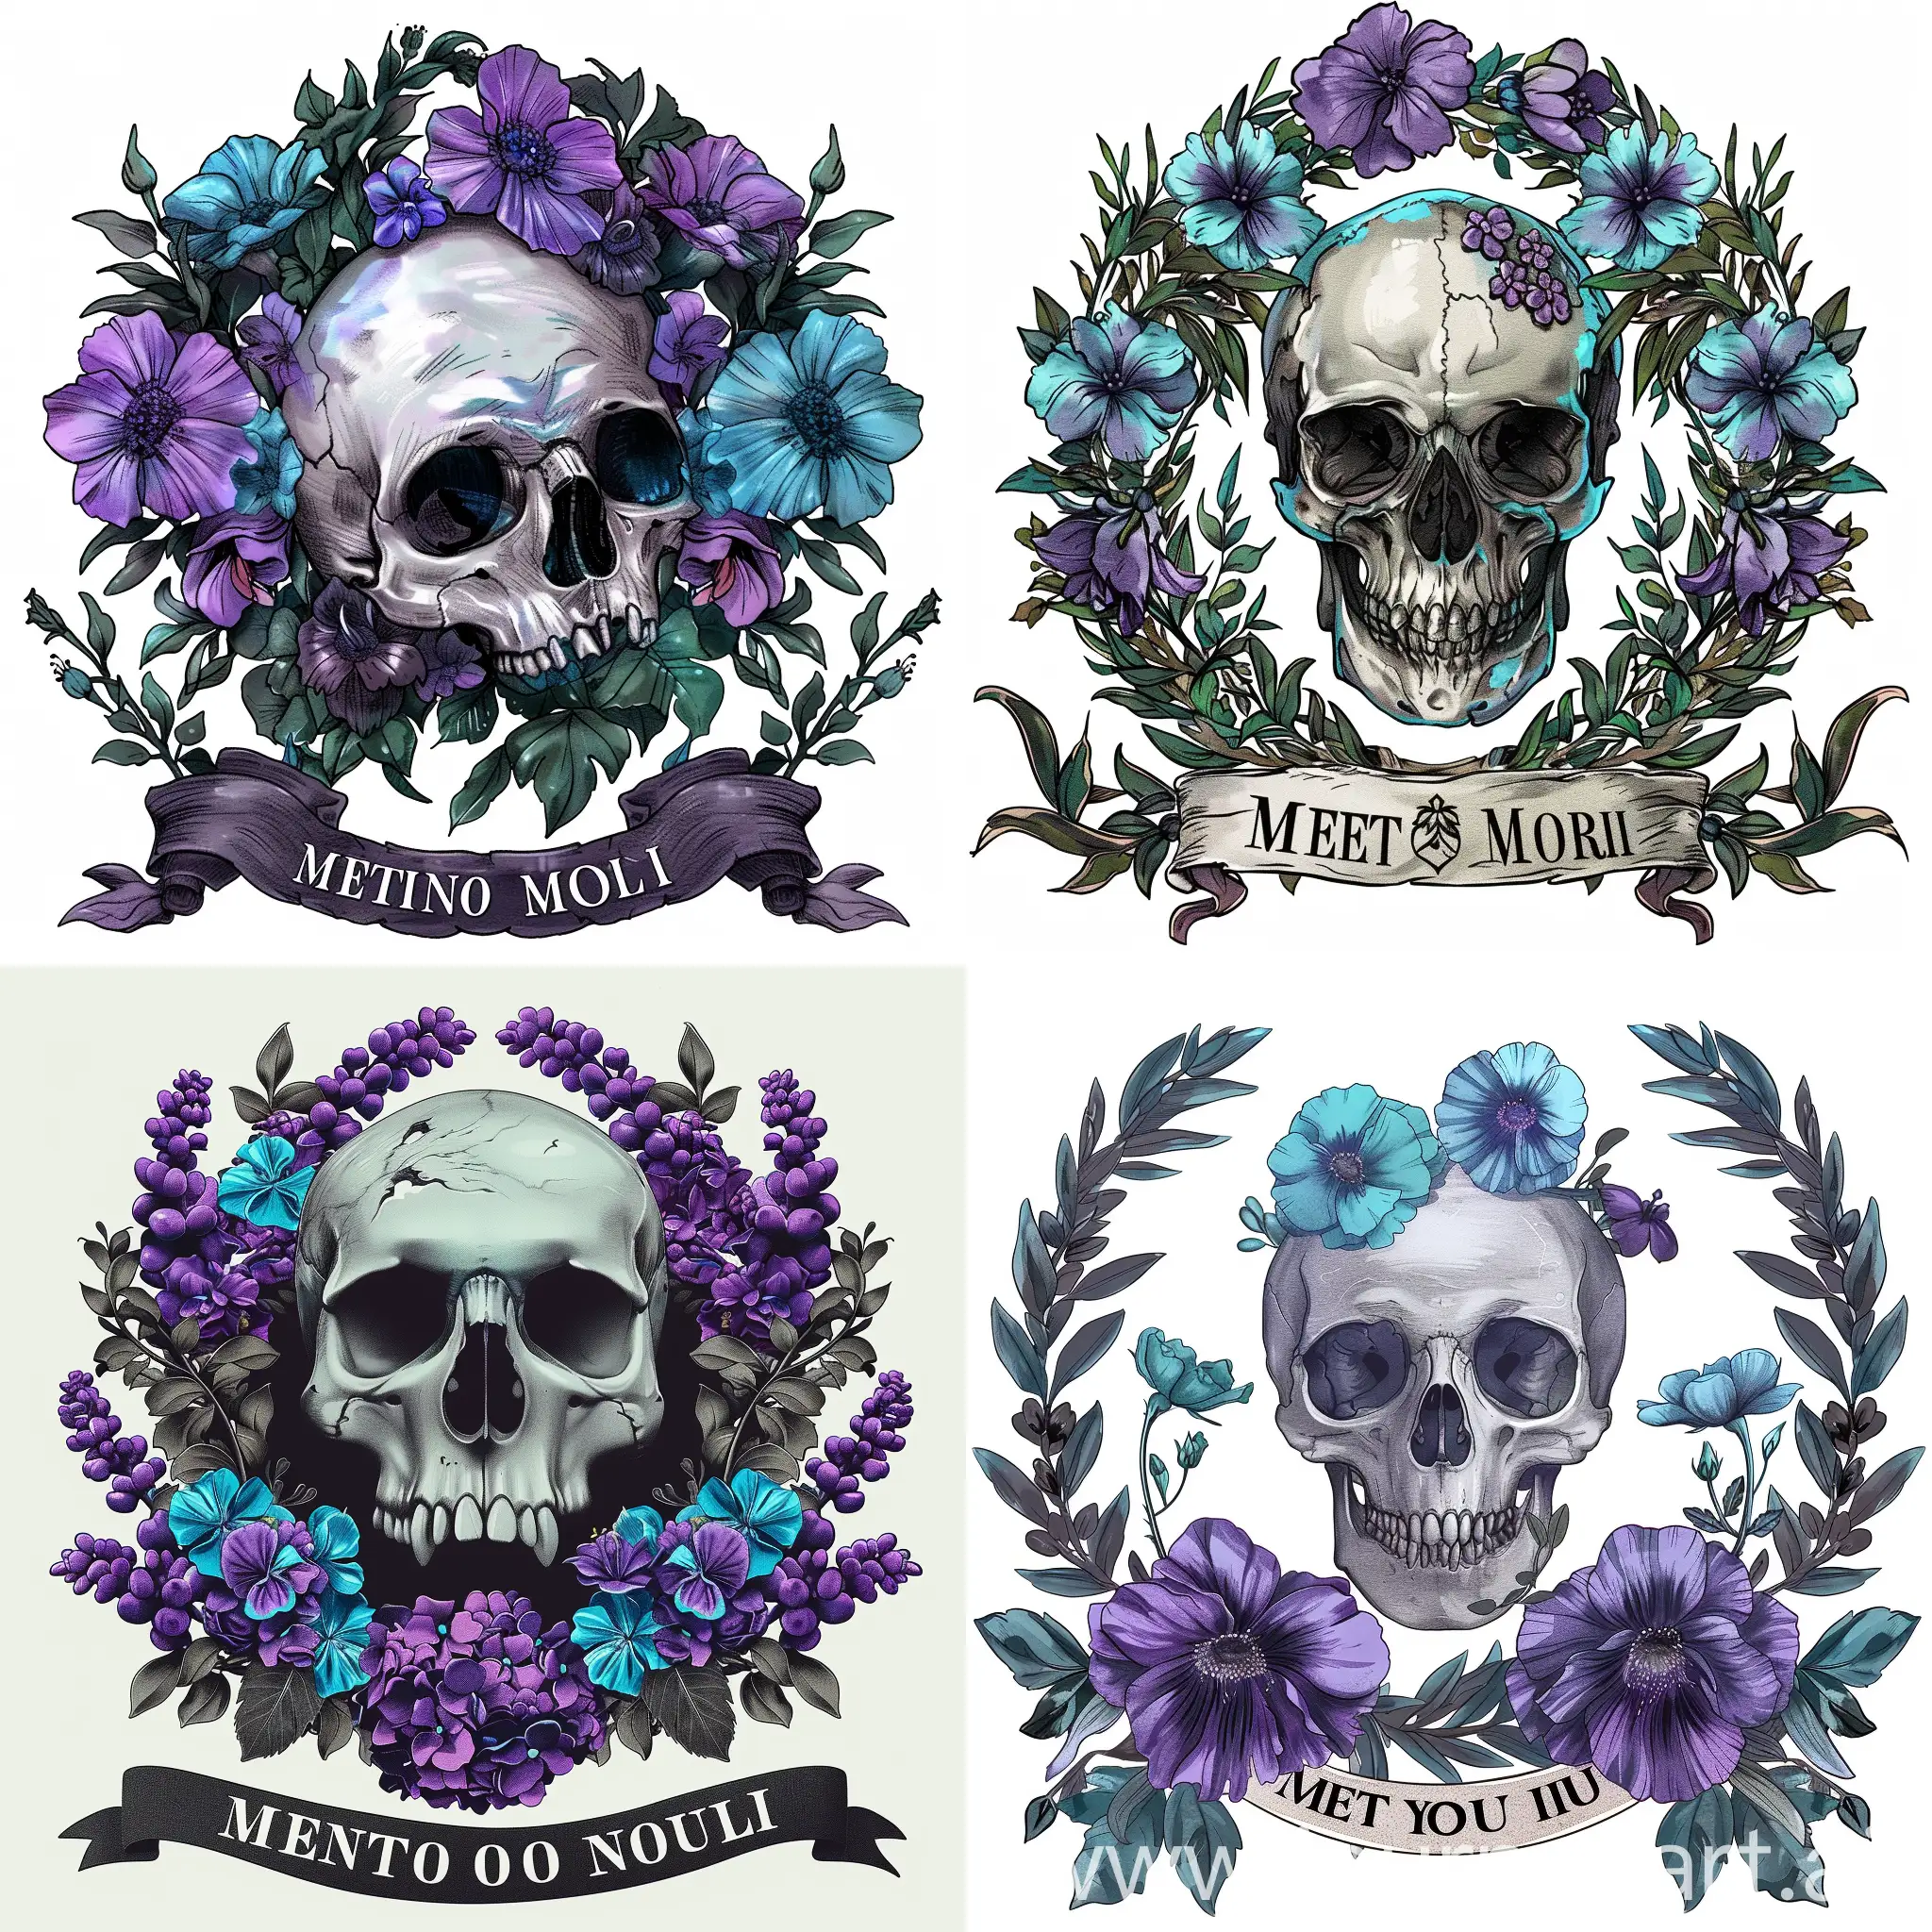 The logo of the intelligence service, which depicts a skull decorated with turquoise and purple flowers, in a wreath, and the inscription "Memento Mori" at the bottom